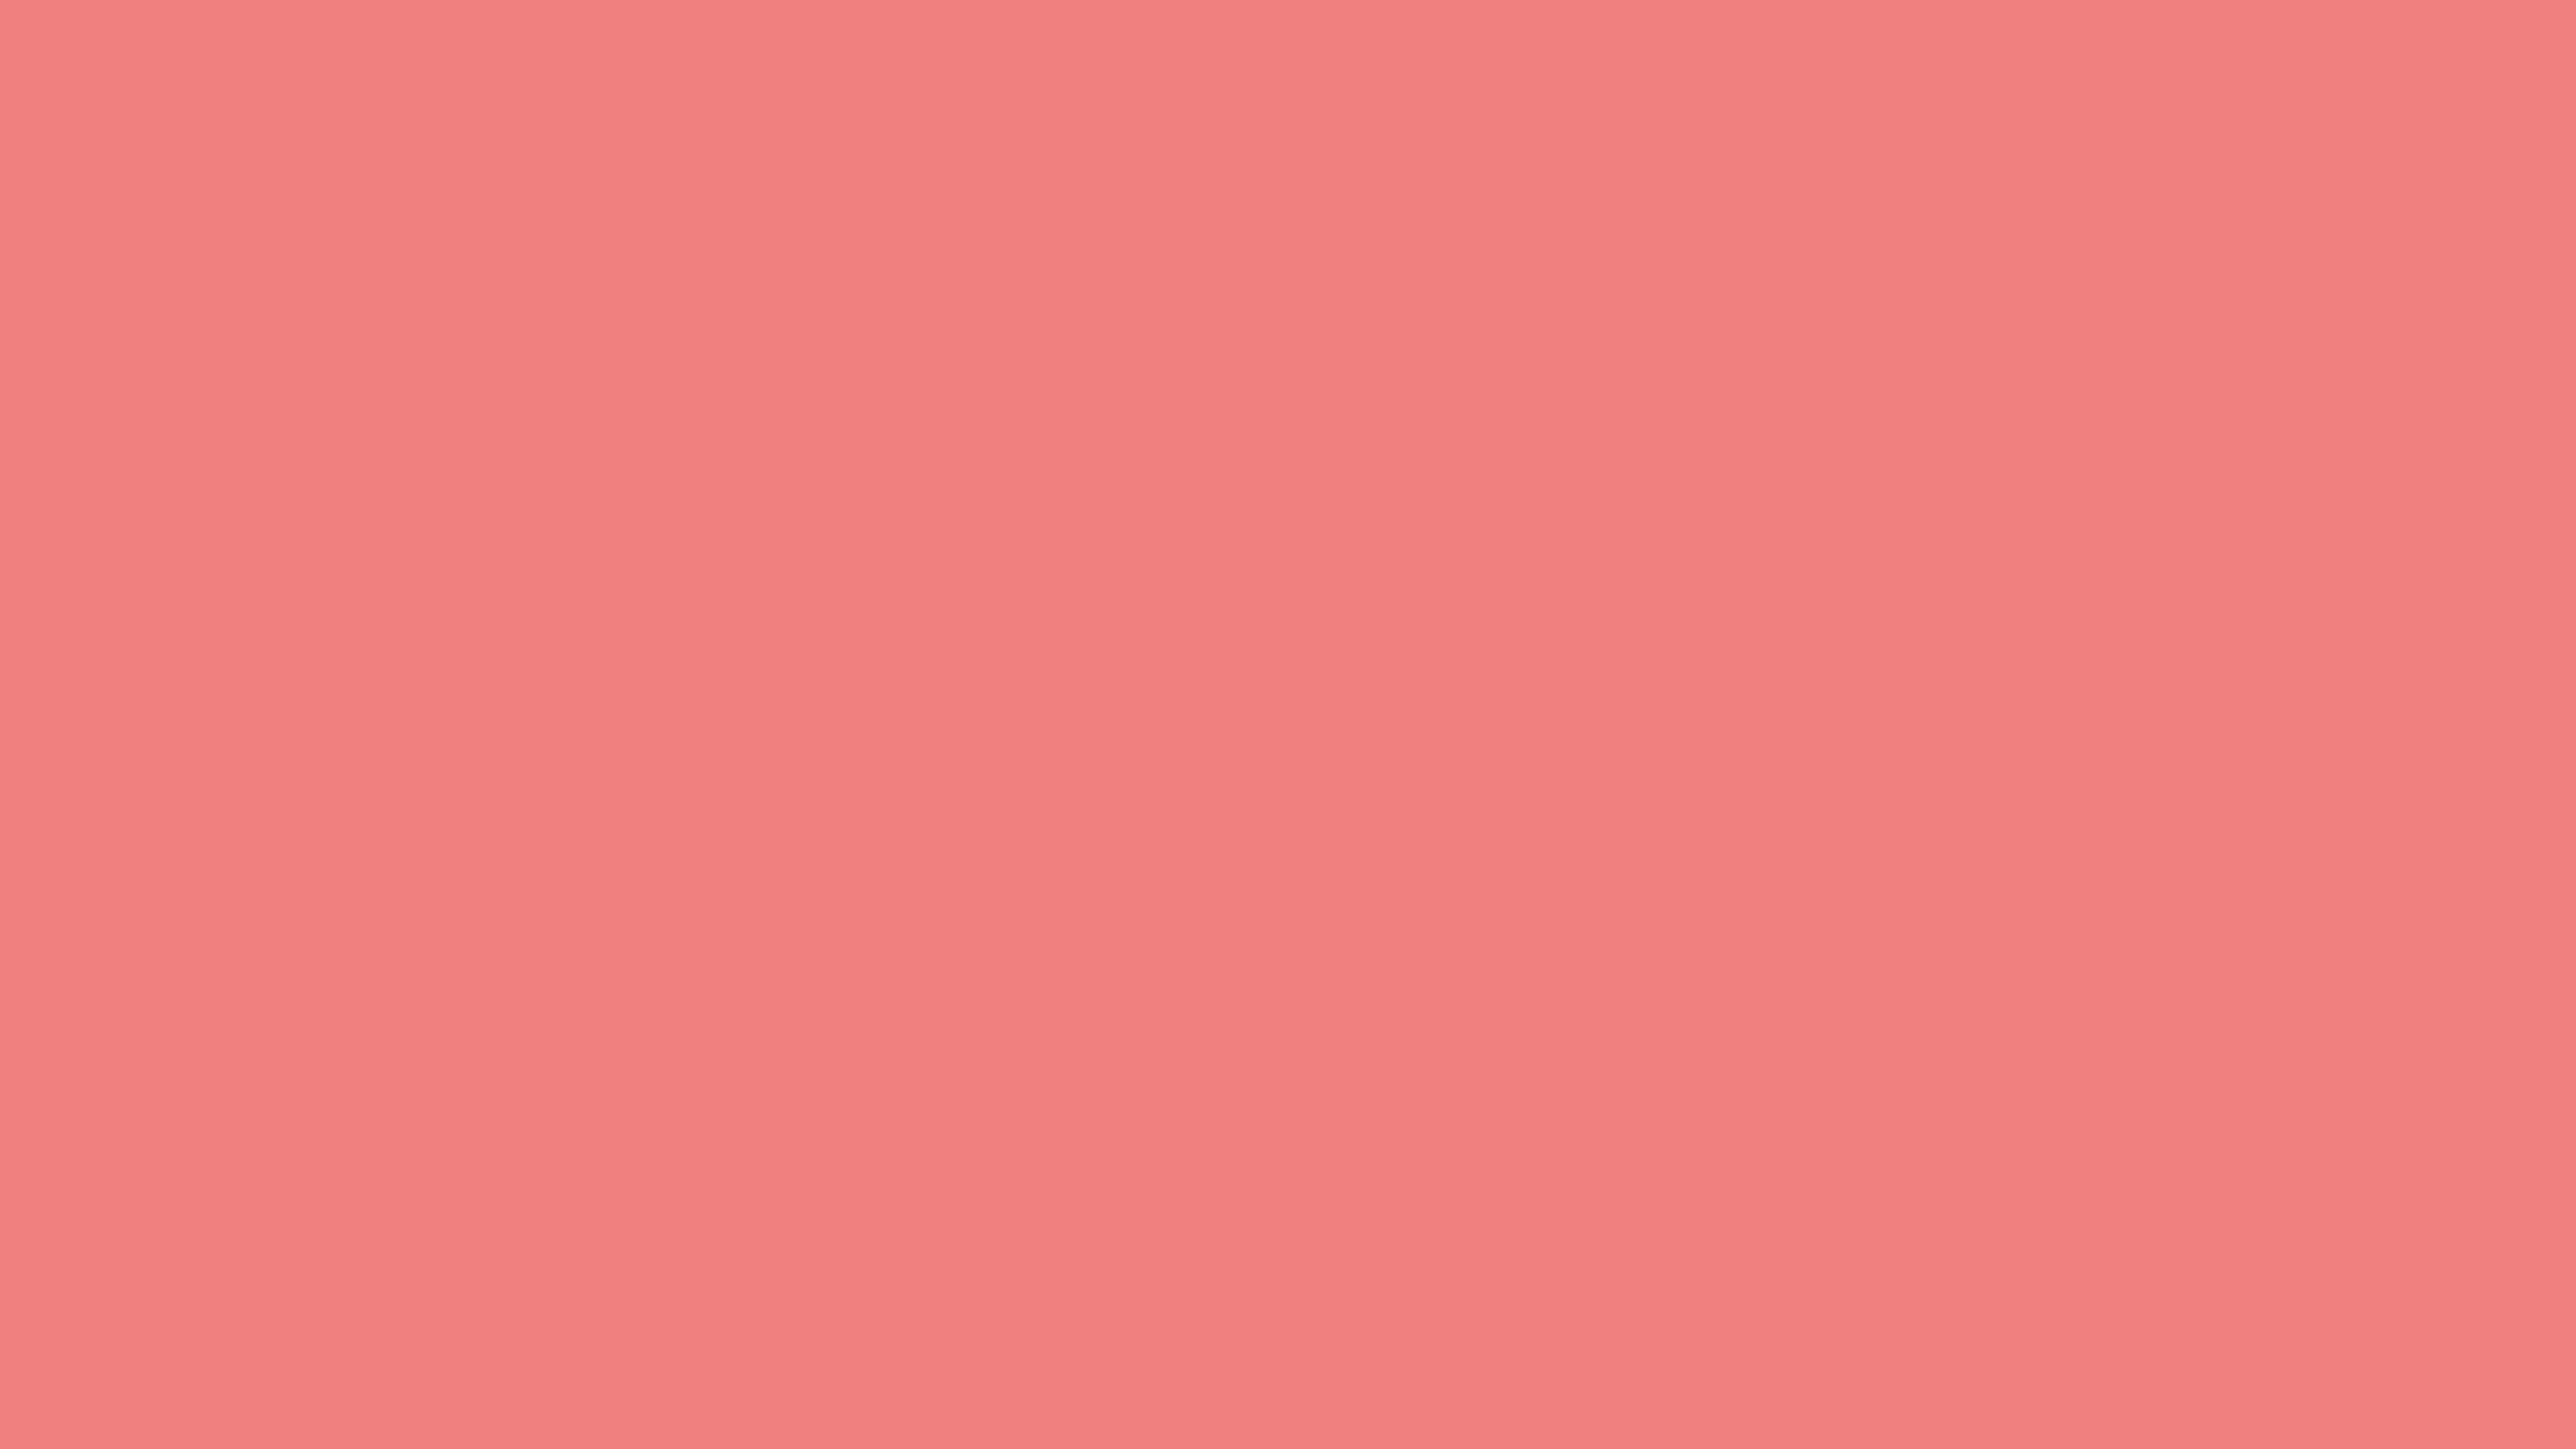 5120x2880 Light Coral Solid Color Background